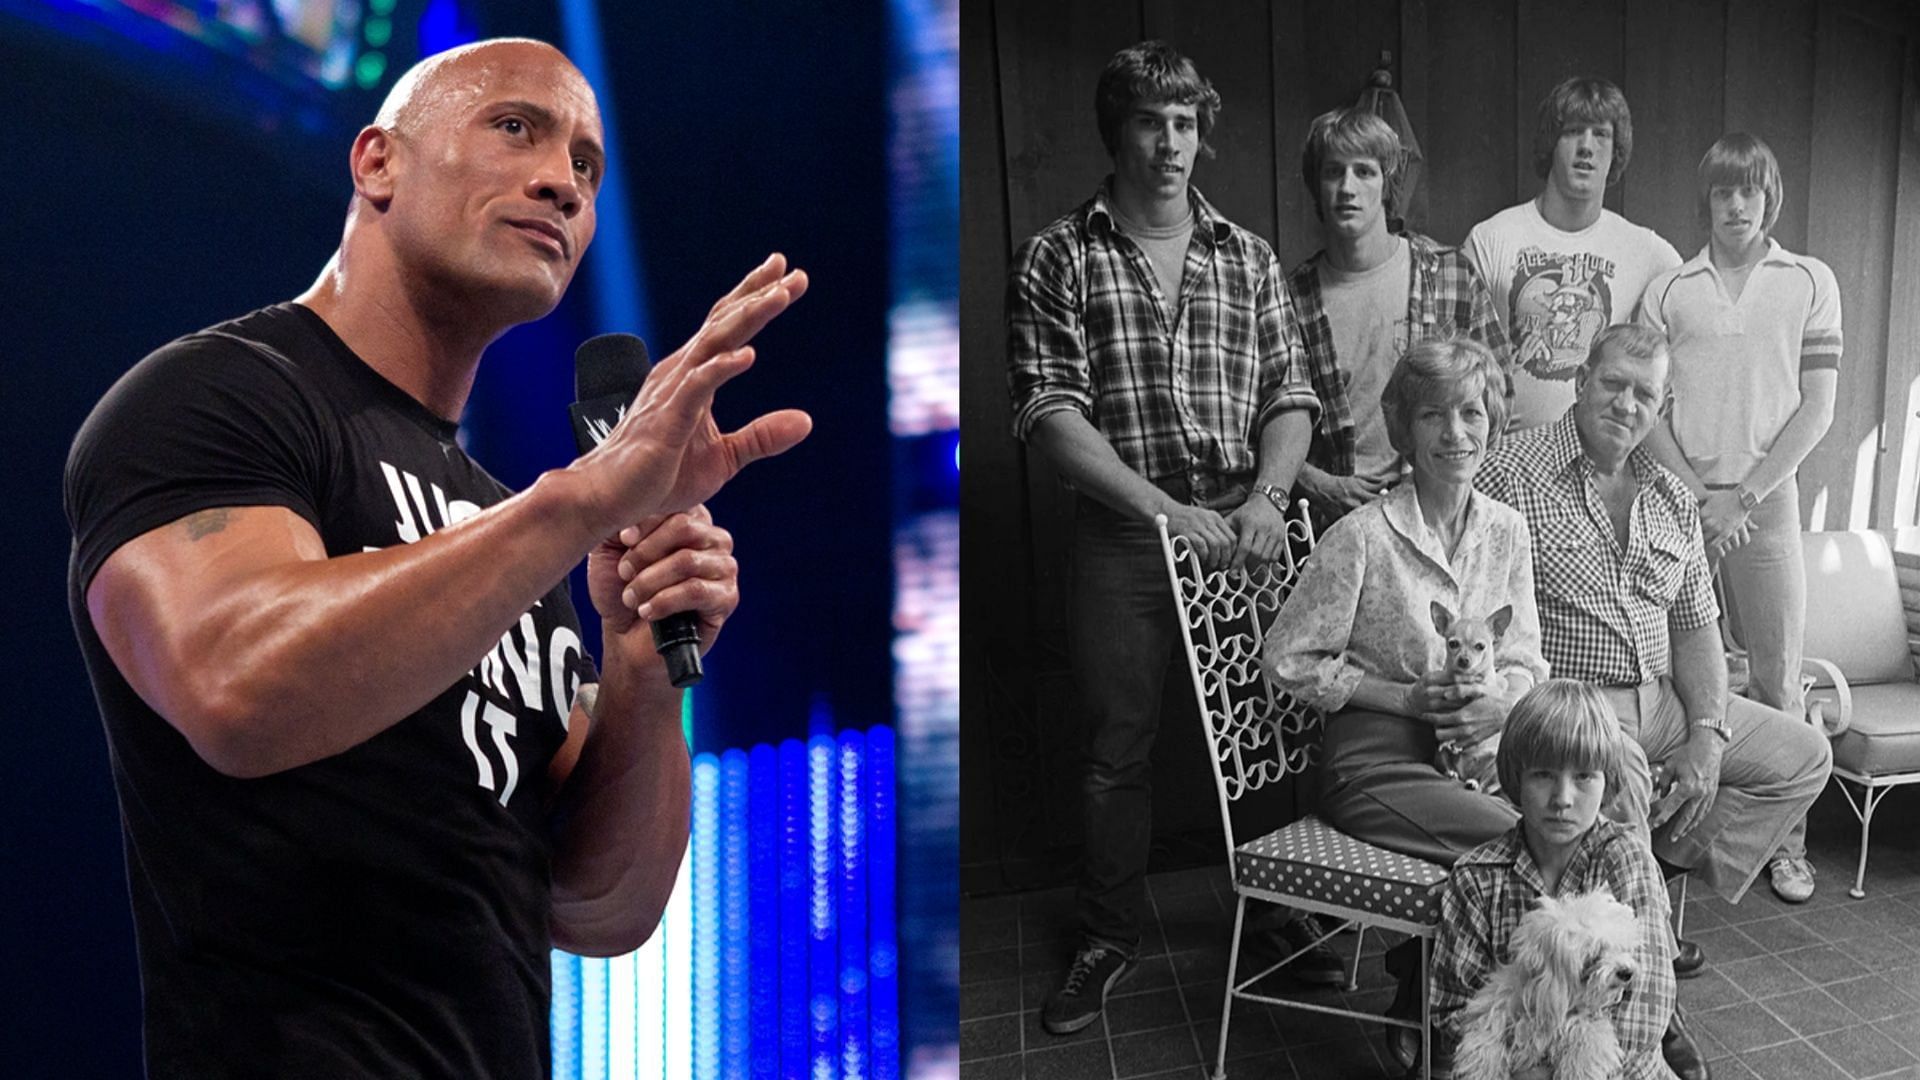 The Rock and The Von Erich Family